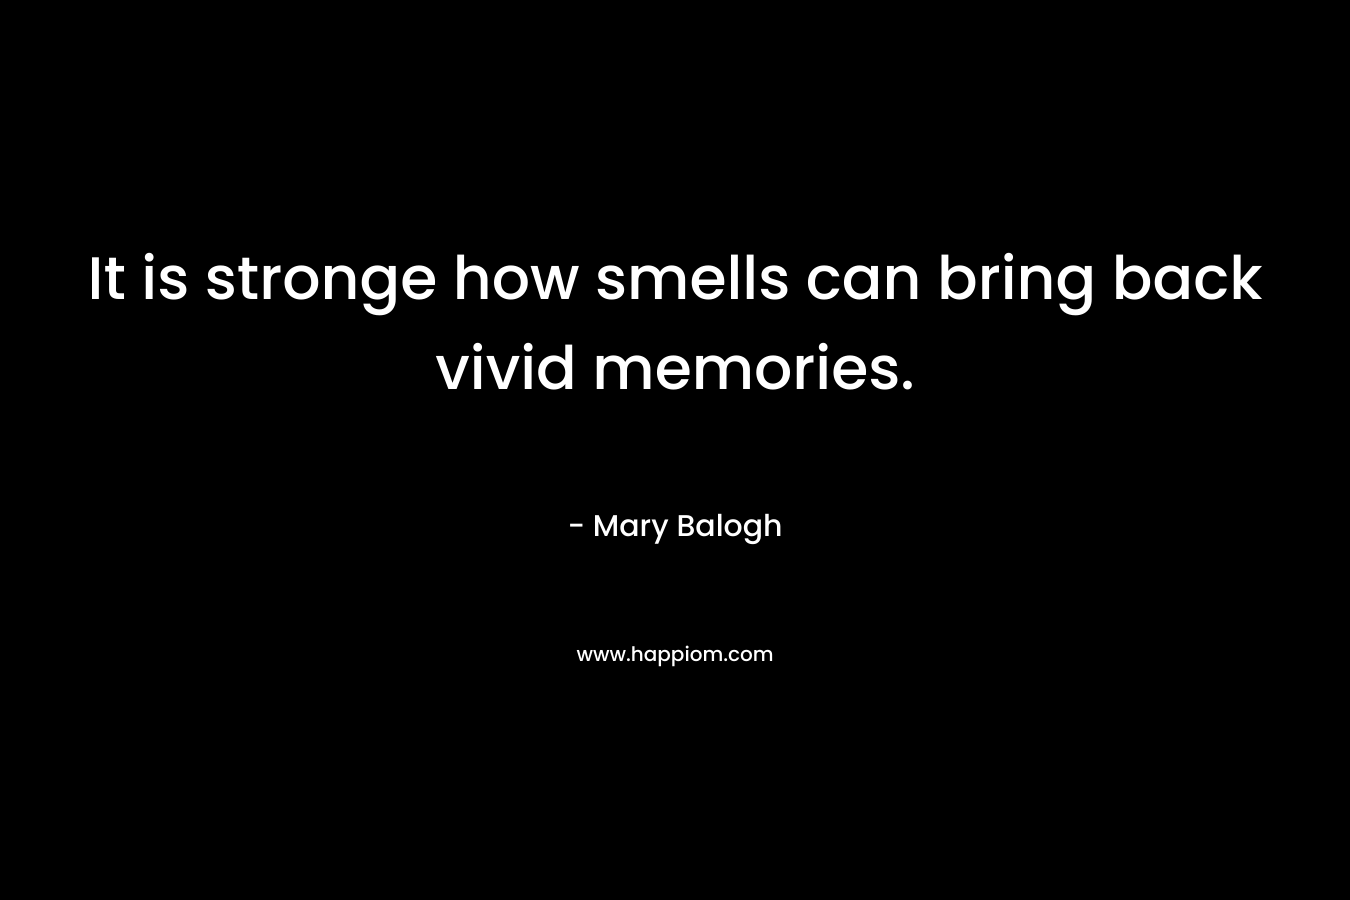 It is stronge how smells can bring back vivid memories.